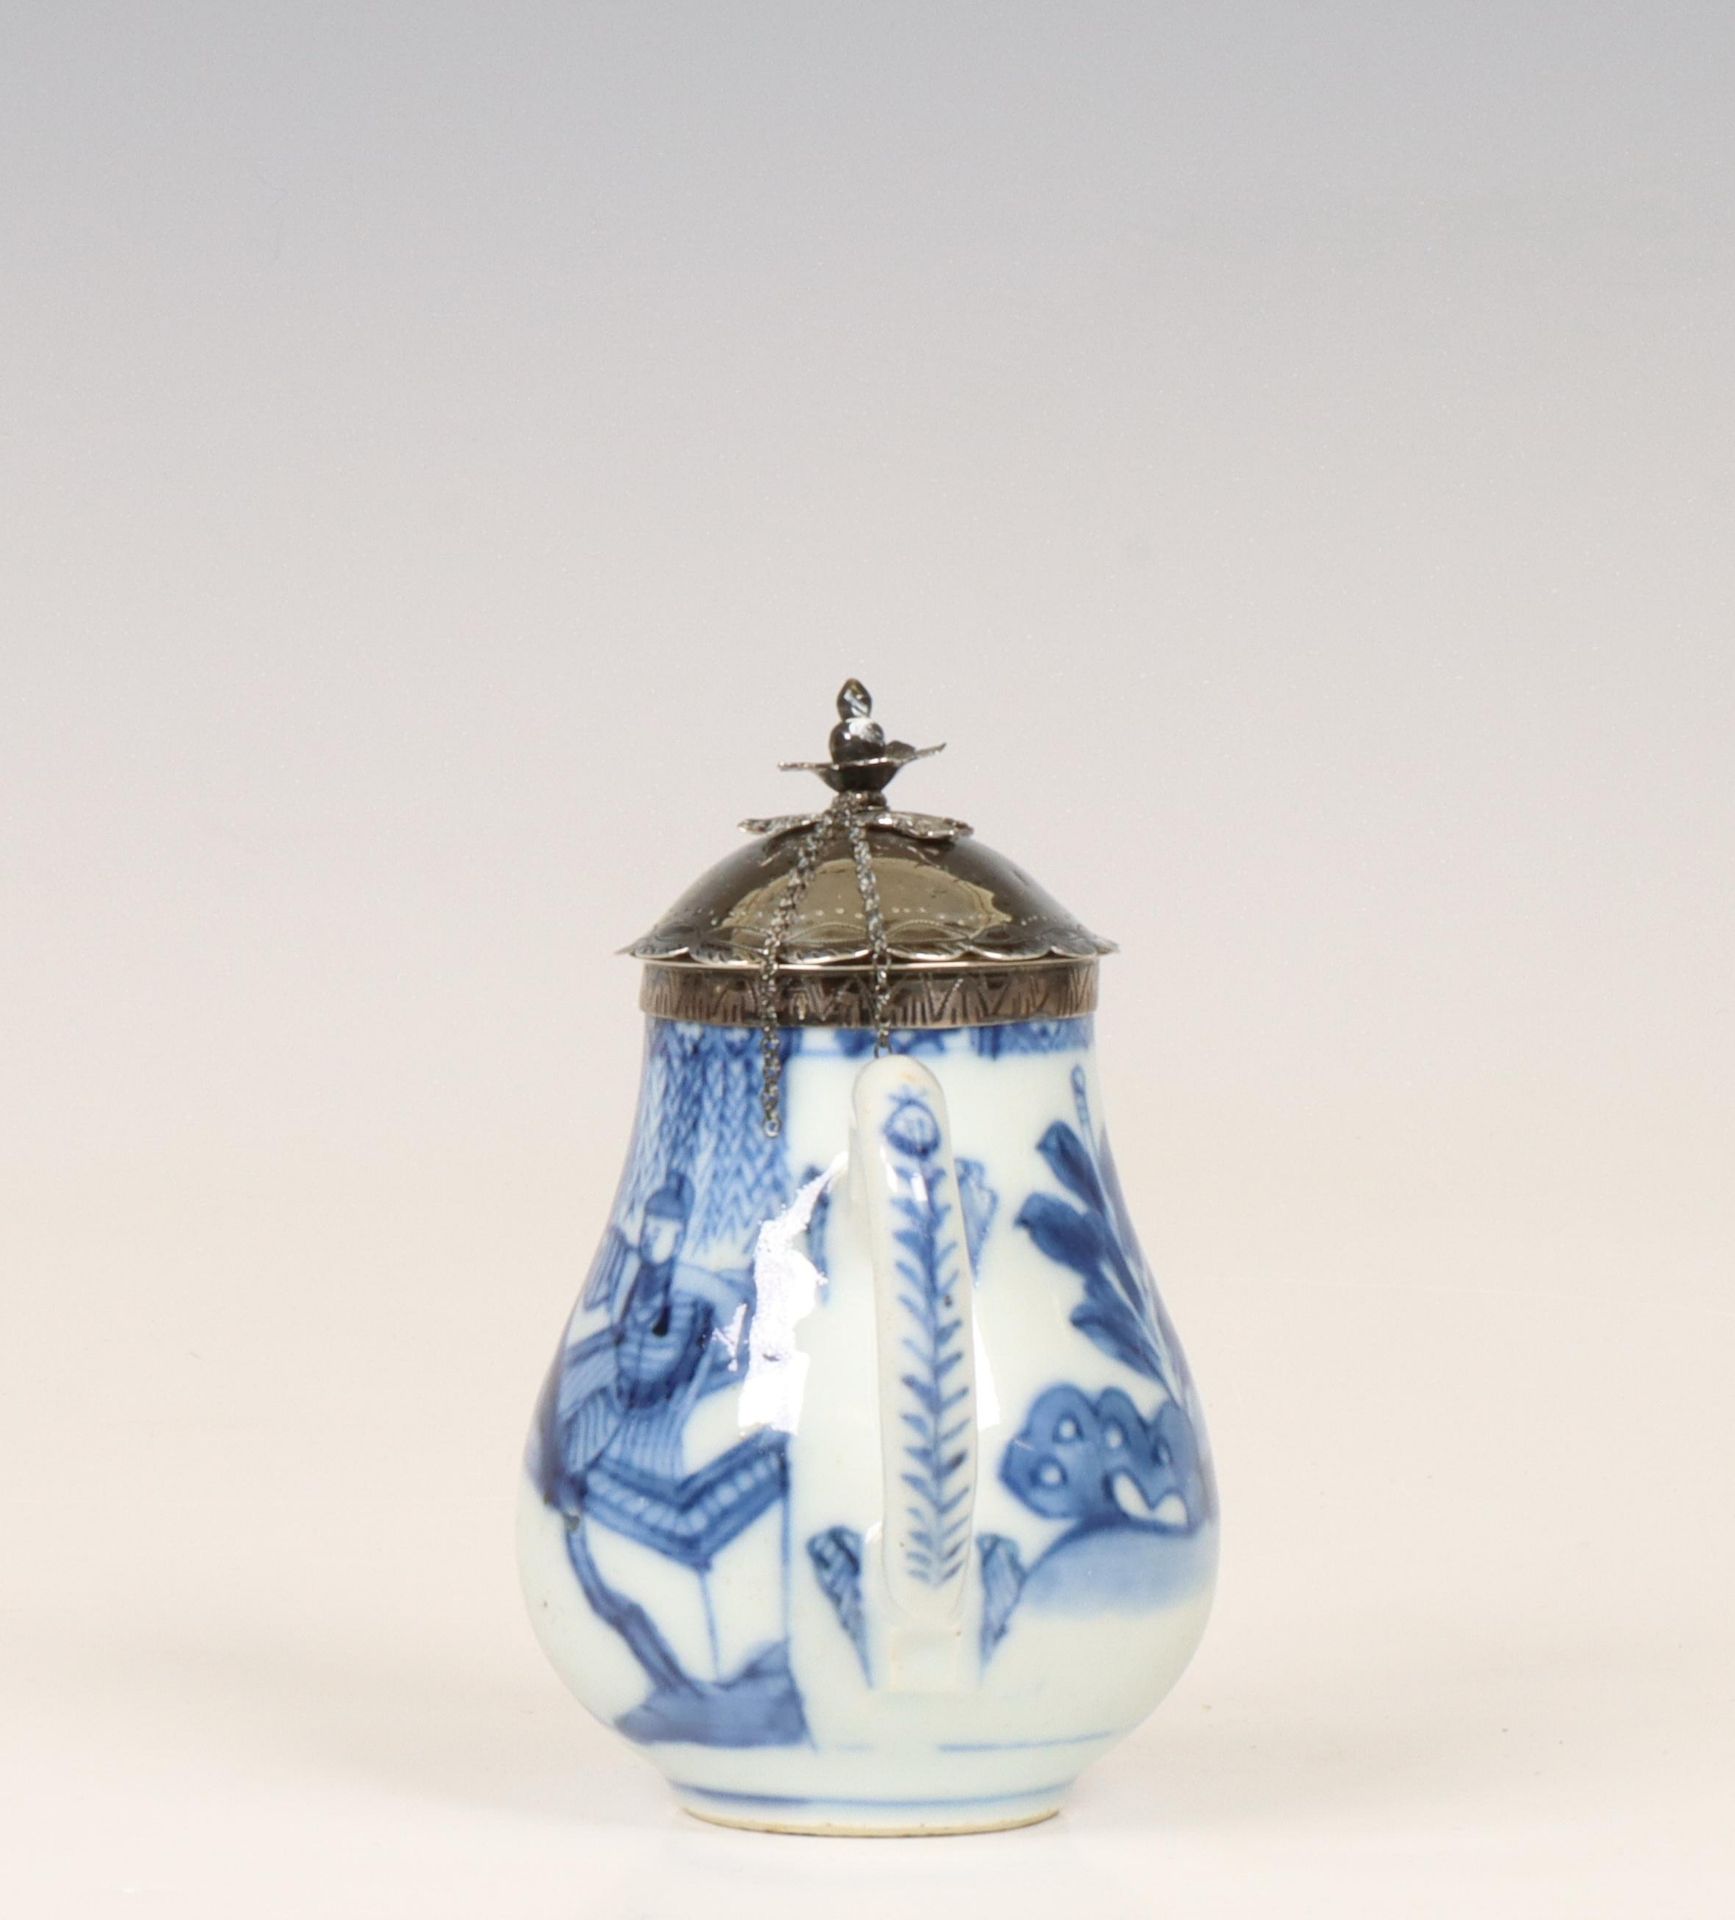 China, silver-mounted blue and white porcelain 'Romance of the Western Chamber' teapot, 18th century - Bild 3 aus 3